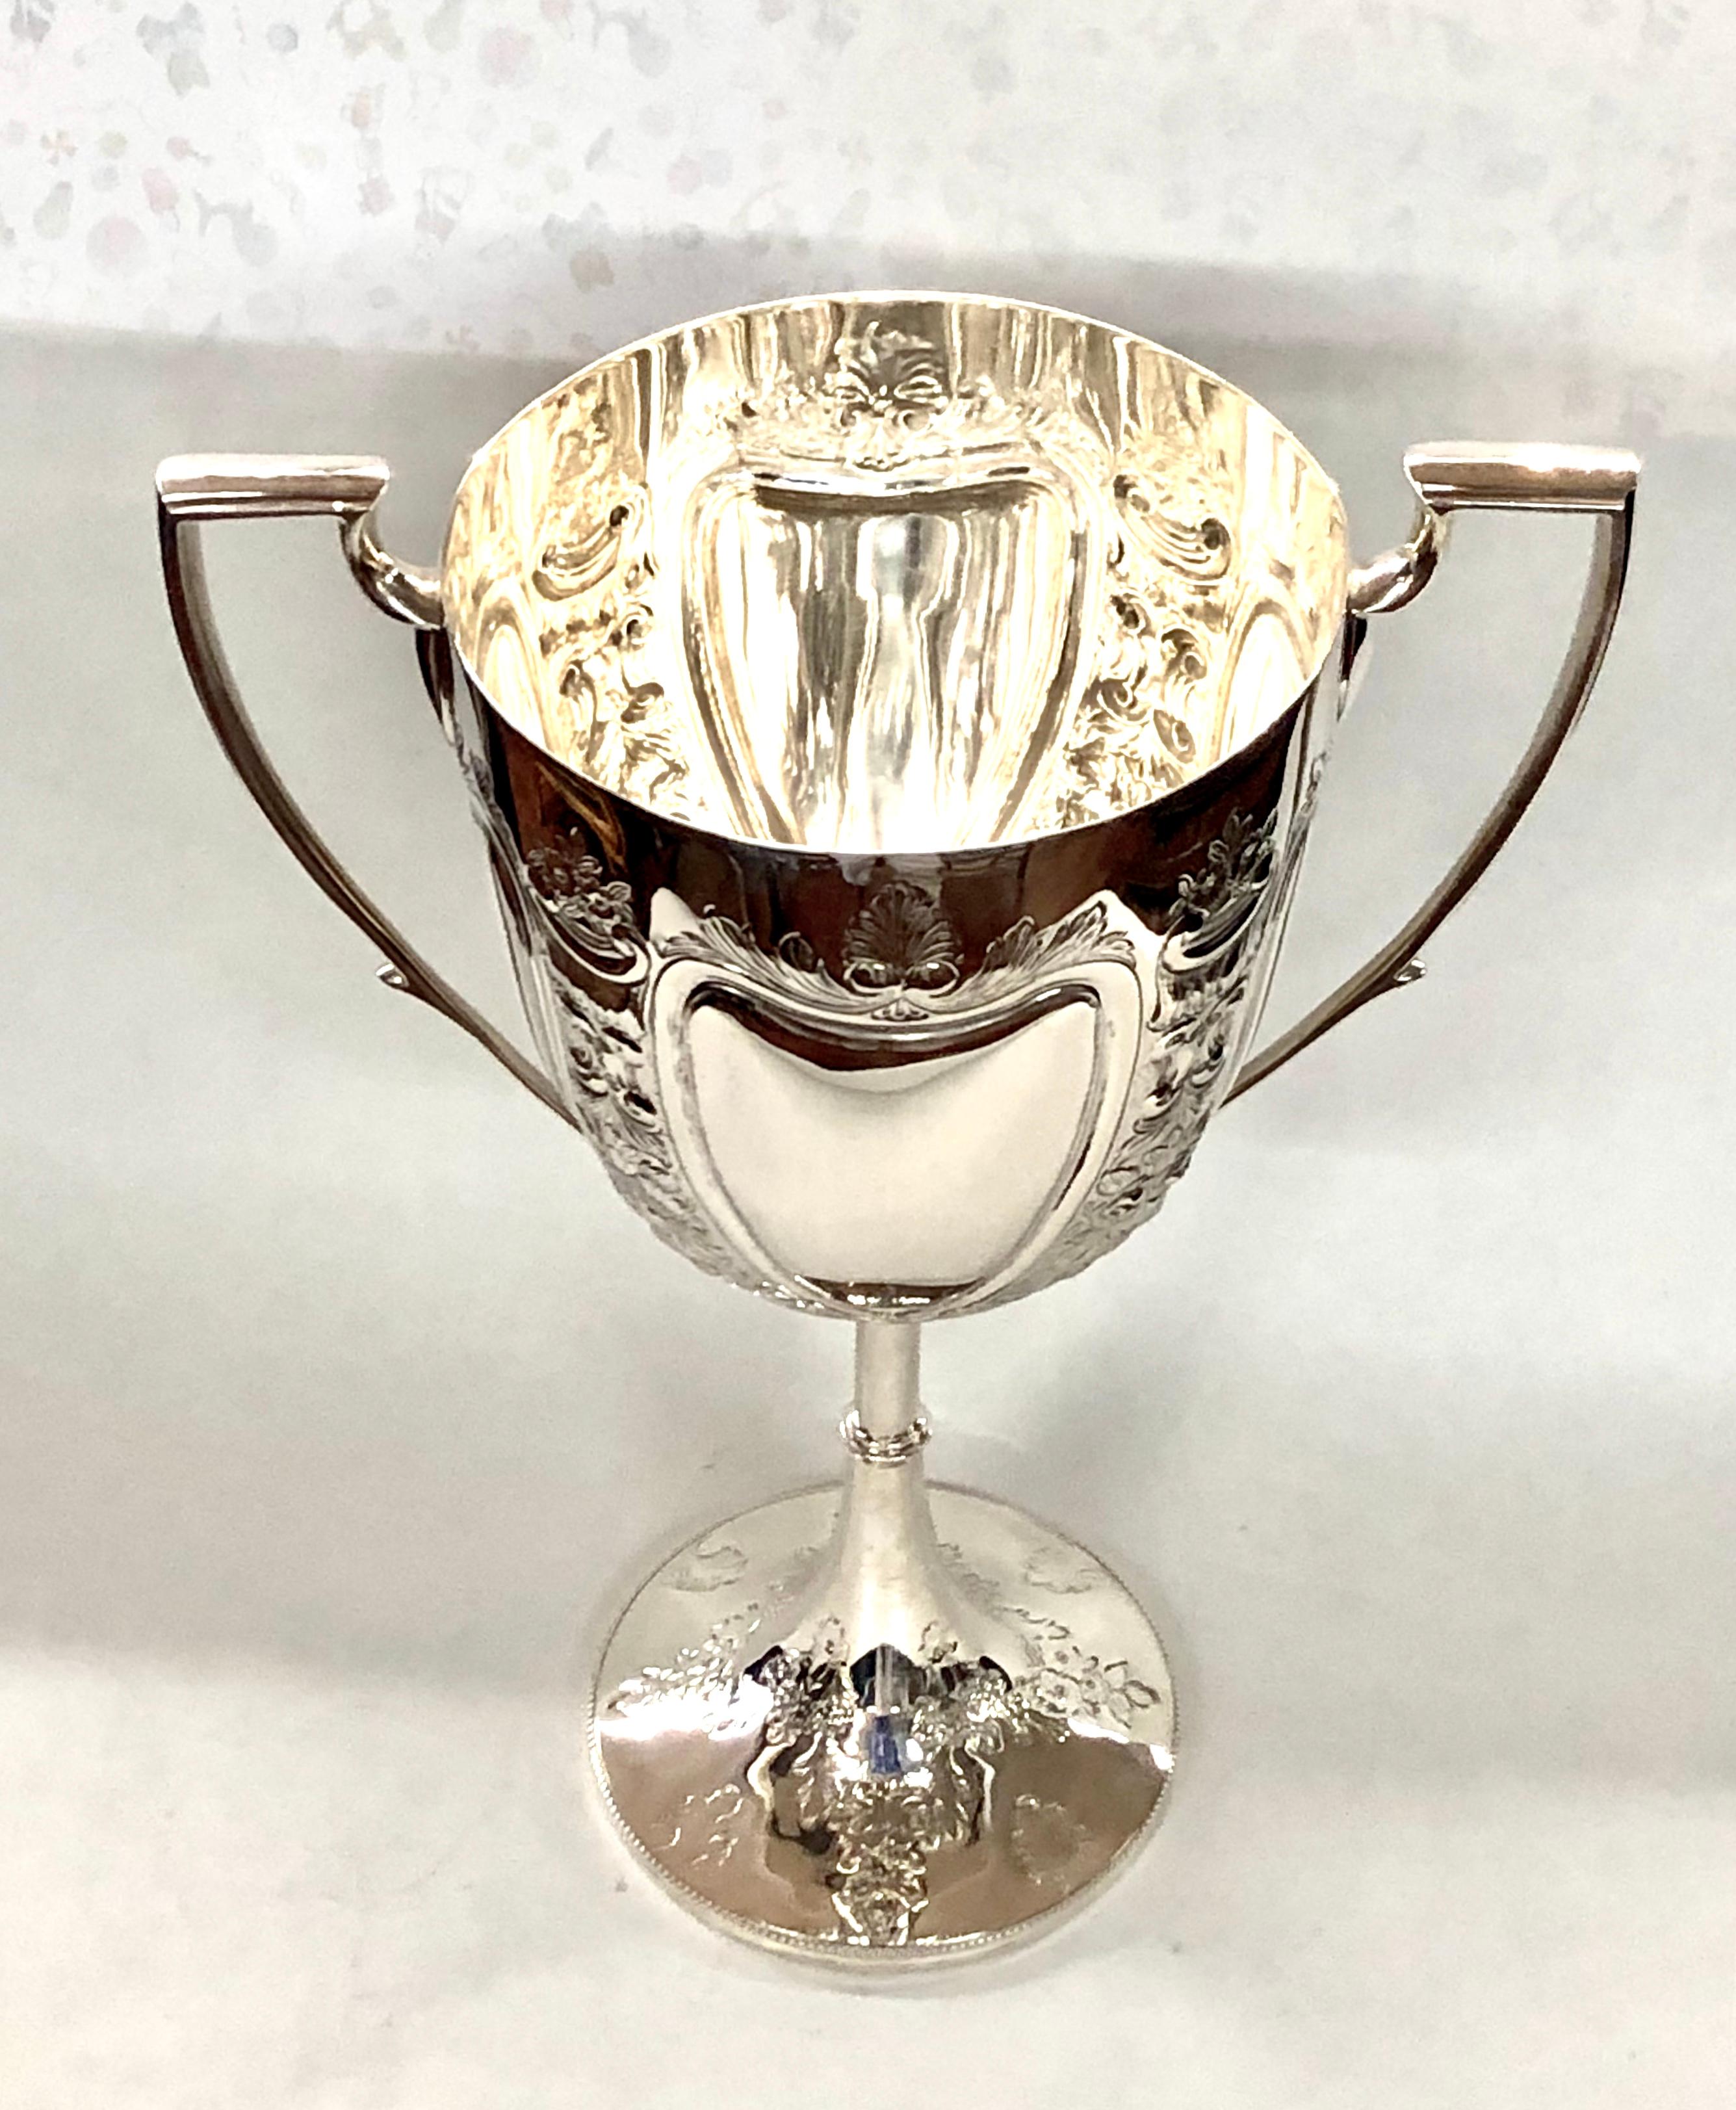 Fabulous antique English Sheffield silver plate trophy or loving cup with exceptional crisp hand chasing on cup and on base. Two large cartouches on either side suitable for engraving/inscribing. This is a monumental size suitable for a memorable